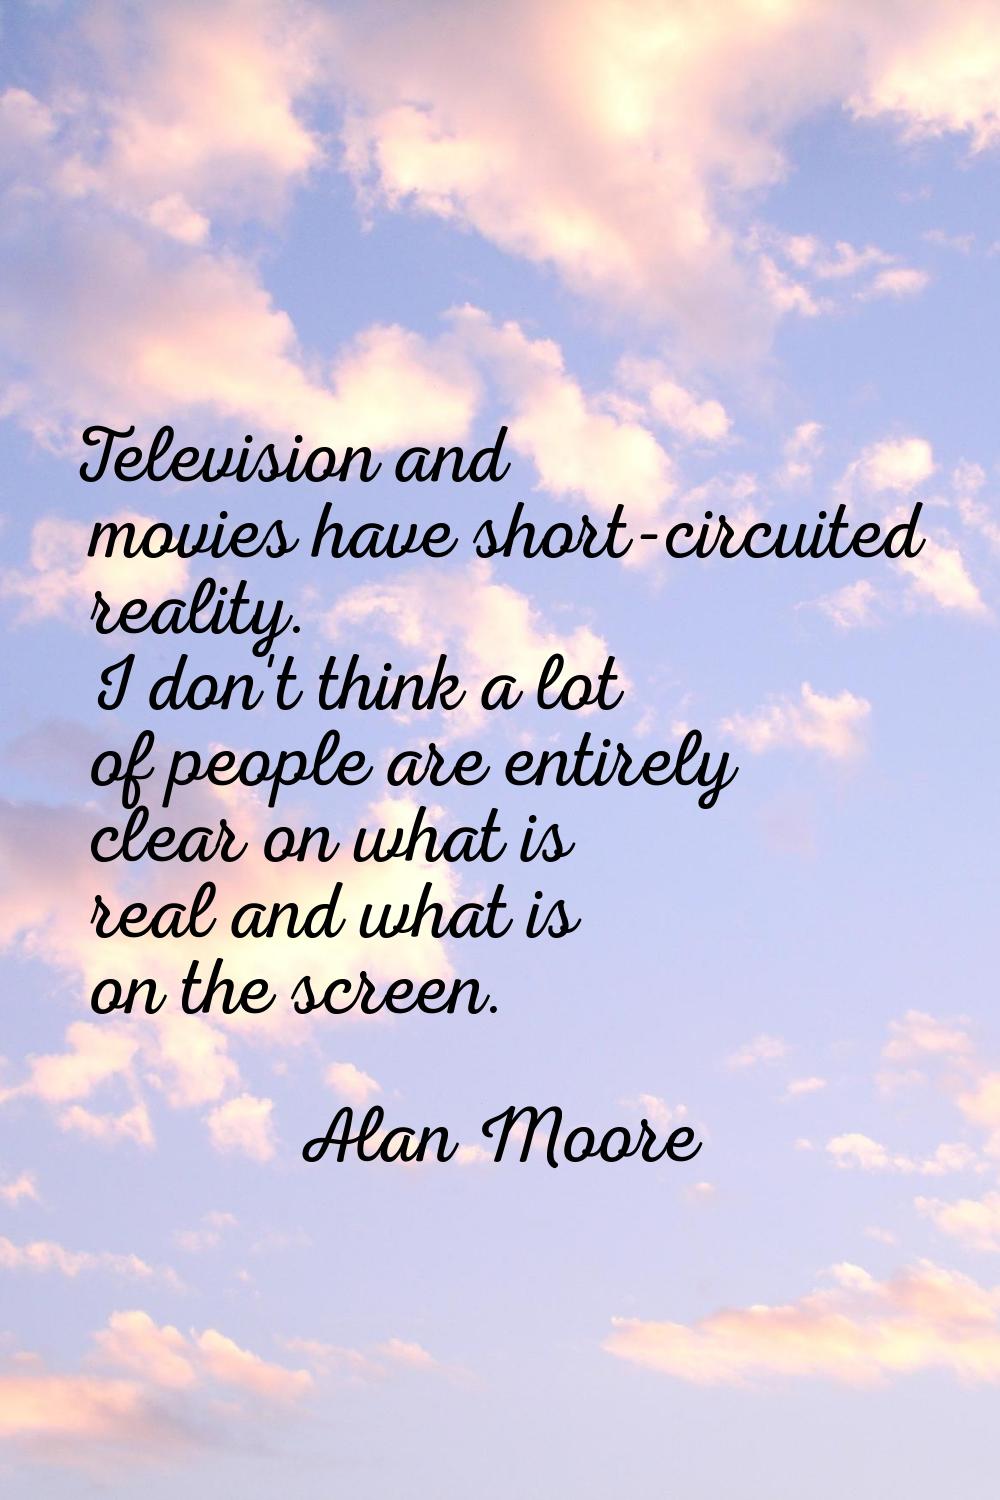 Television and movies have short-circuited reality. I don't think a lot of people are entirely clea